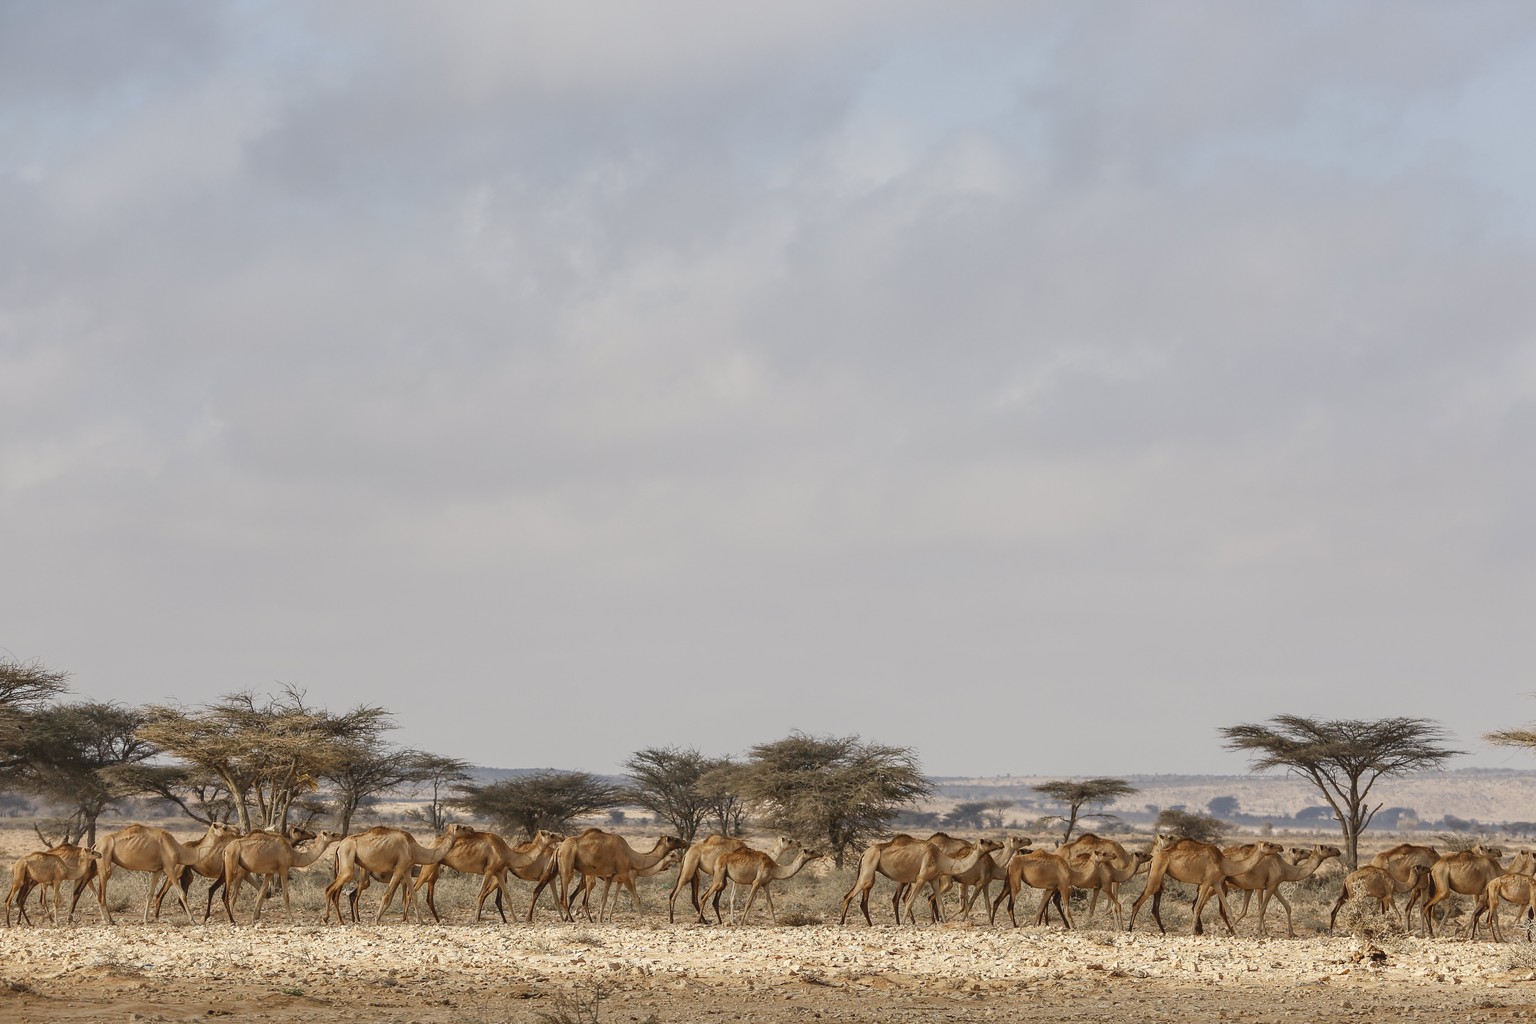 epa05873314 A photograph made available on 27 March 2017 shows a herd of camels passing by an Internally Displaced Person (IDP) camp in the outskirts of Qardho in Somalia&#039;s semi-autonomous region ...